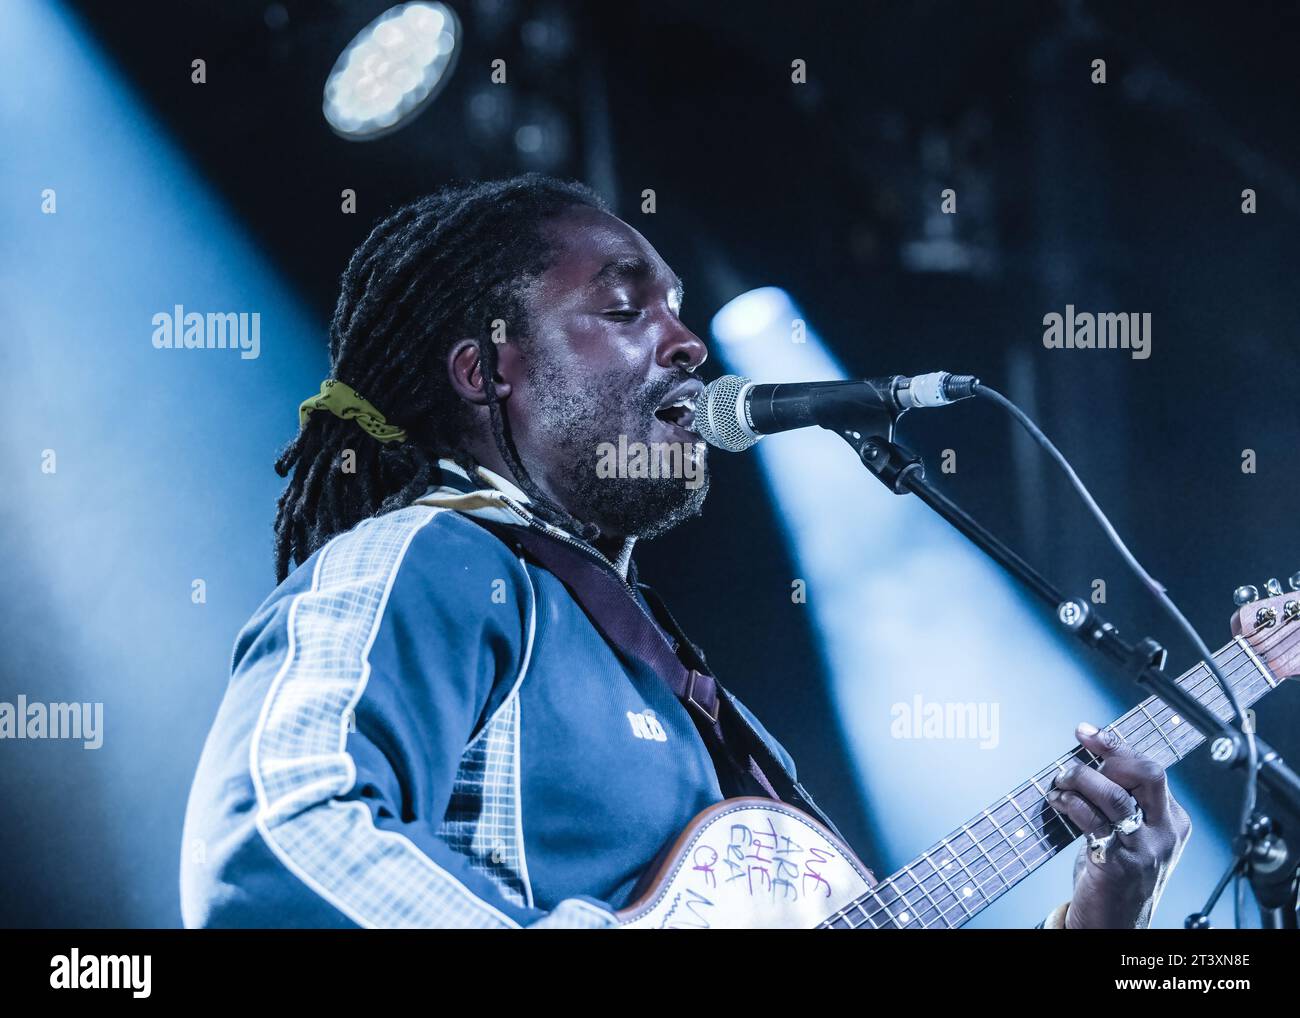 Nottingham, United Kingdom. 26th October 2023, Event: Rock City. “THE STREETS” with Special Guests “HAK BAKER” and “MASTER PEACE”.   PICTURED: HAK BAKER  Credit: Mark Dunn/Alamy Live News (To be included where the image is published). Stock Photo